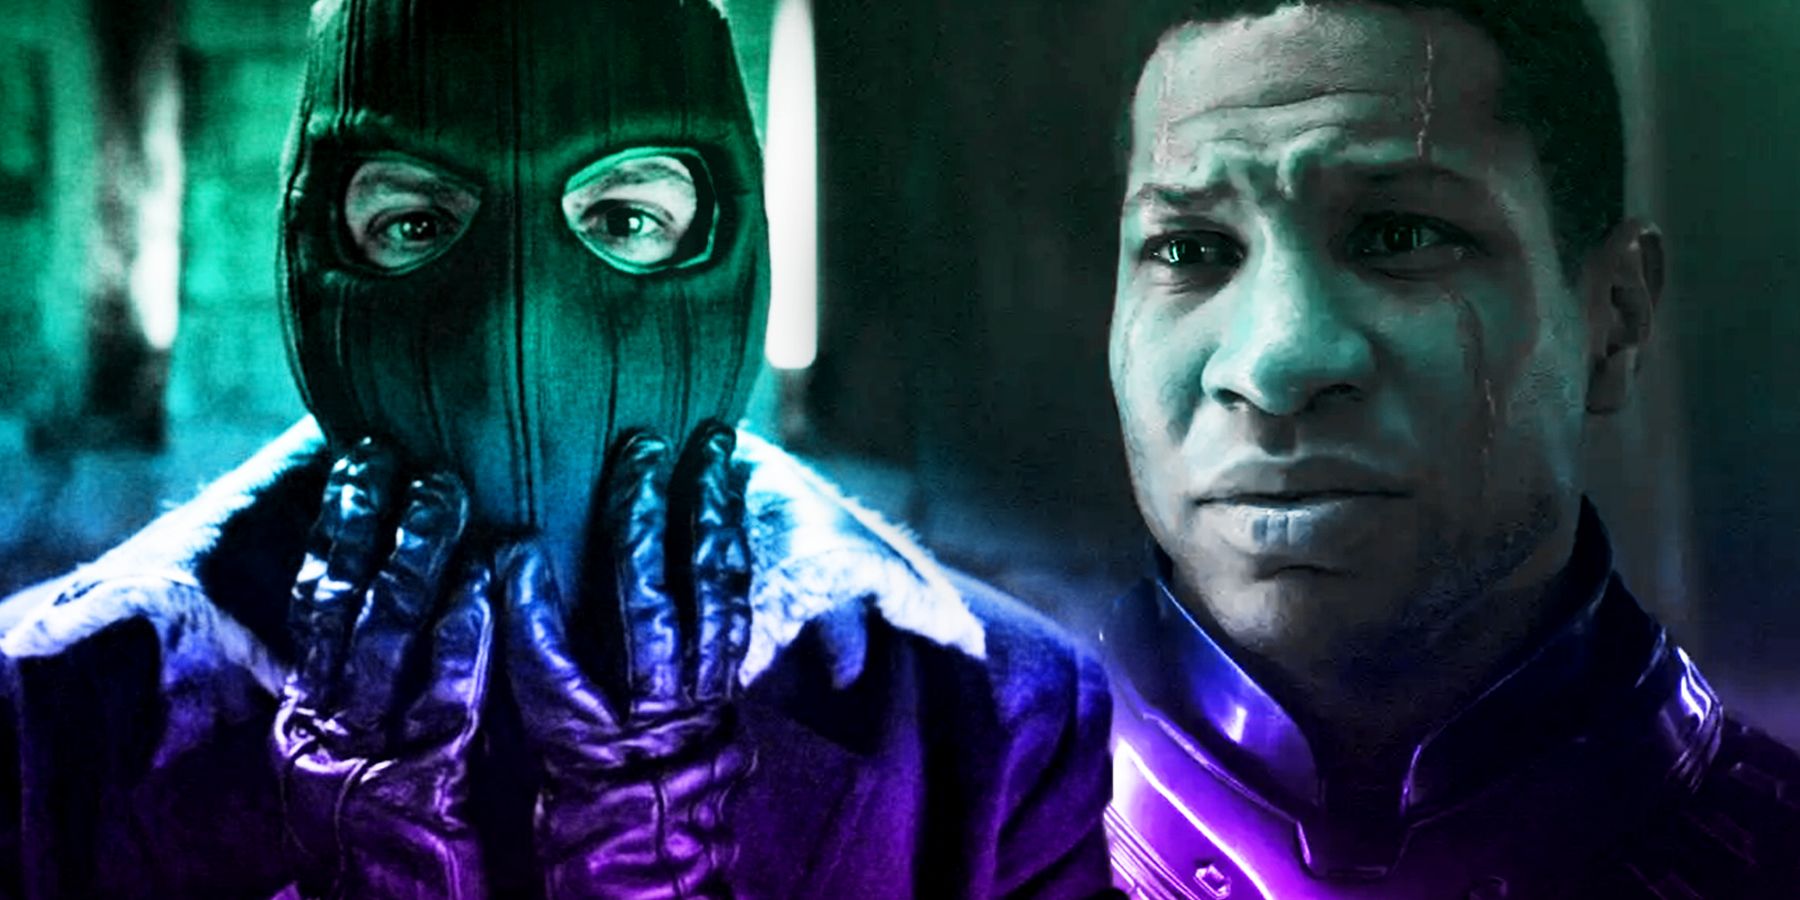 On the left, Baron Zemo puts on his mask. On the right, Kang looks conflicted.